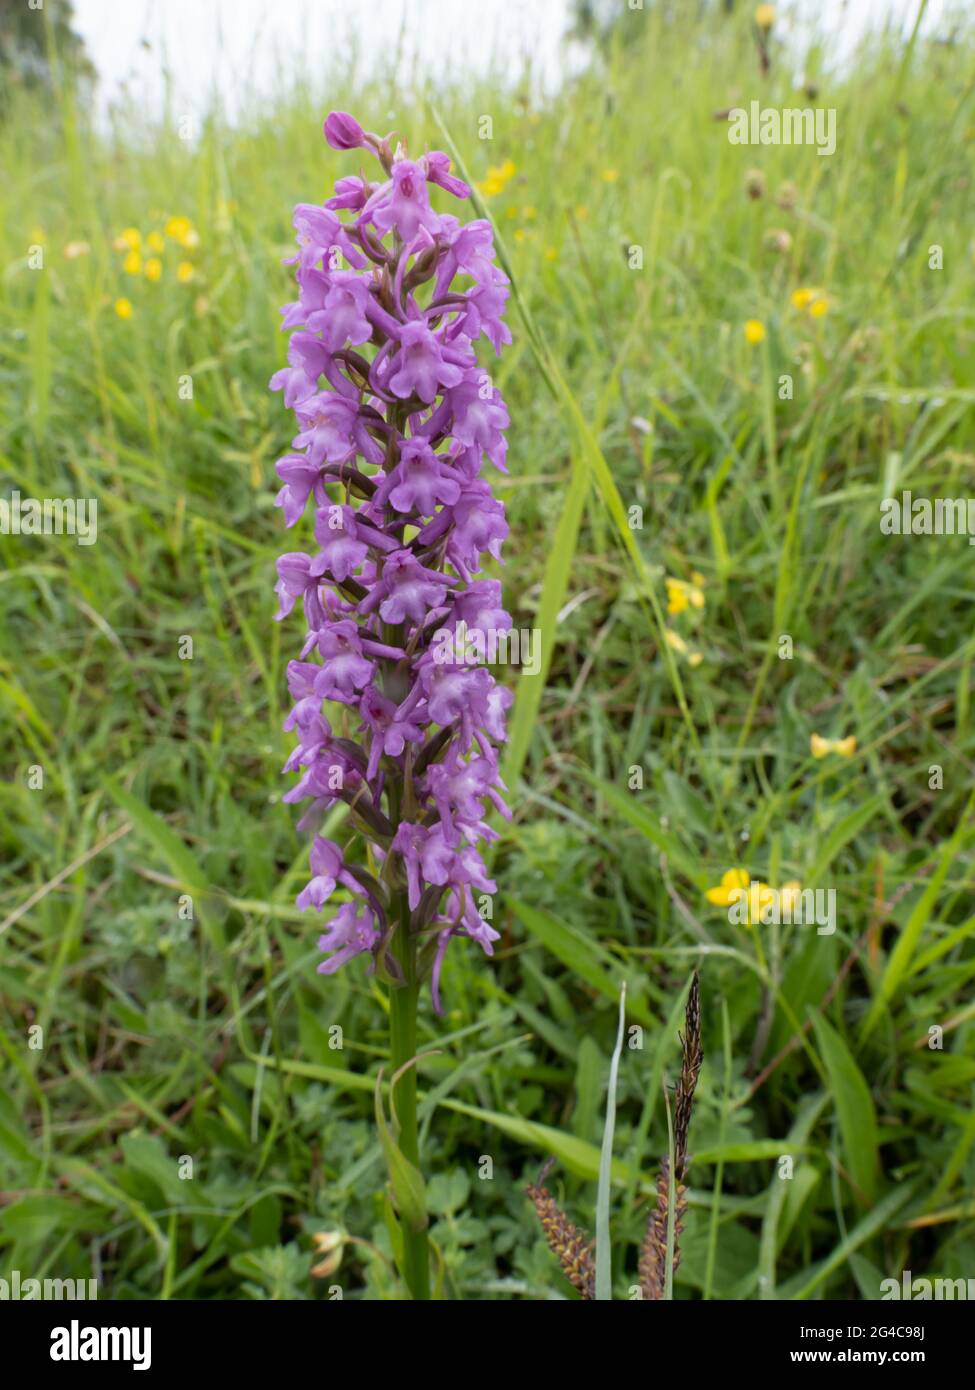 Gymnadenia conopsea, commonly known as the Fragrant Orchid or Chalk Fragrant Orchid Stock Photo